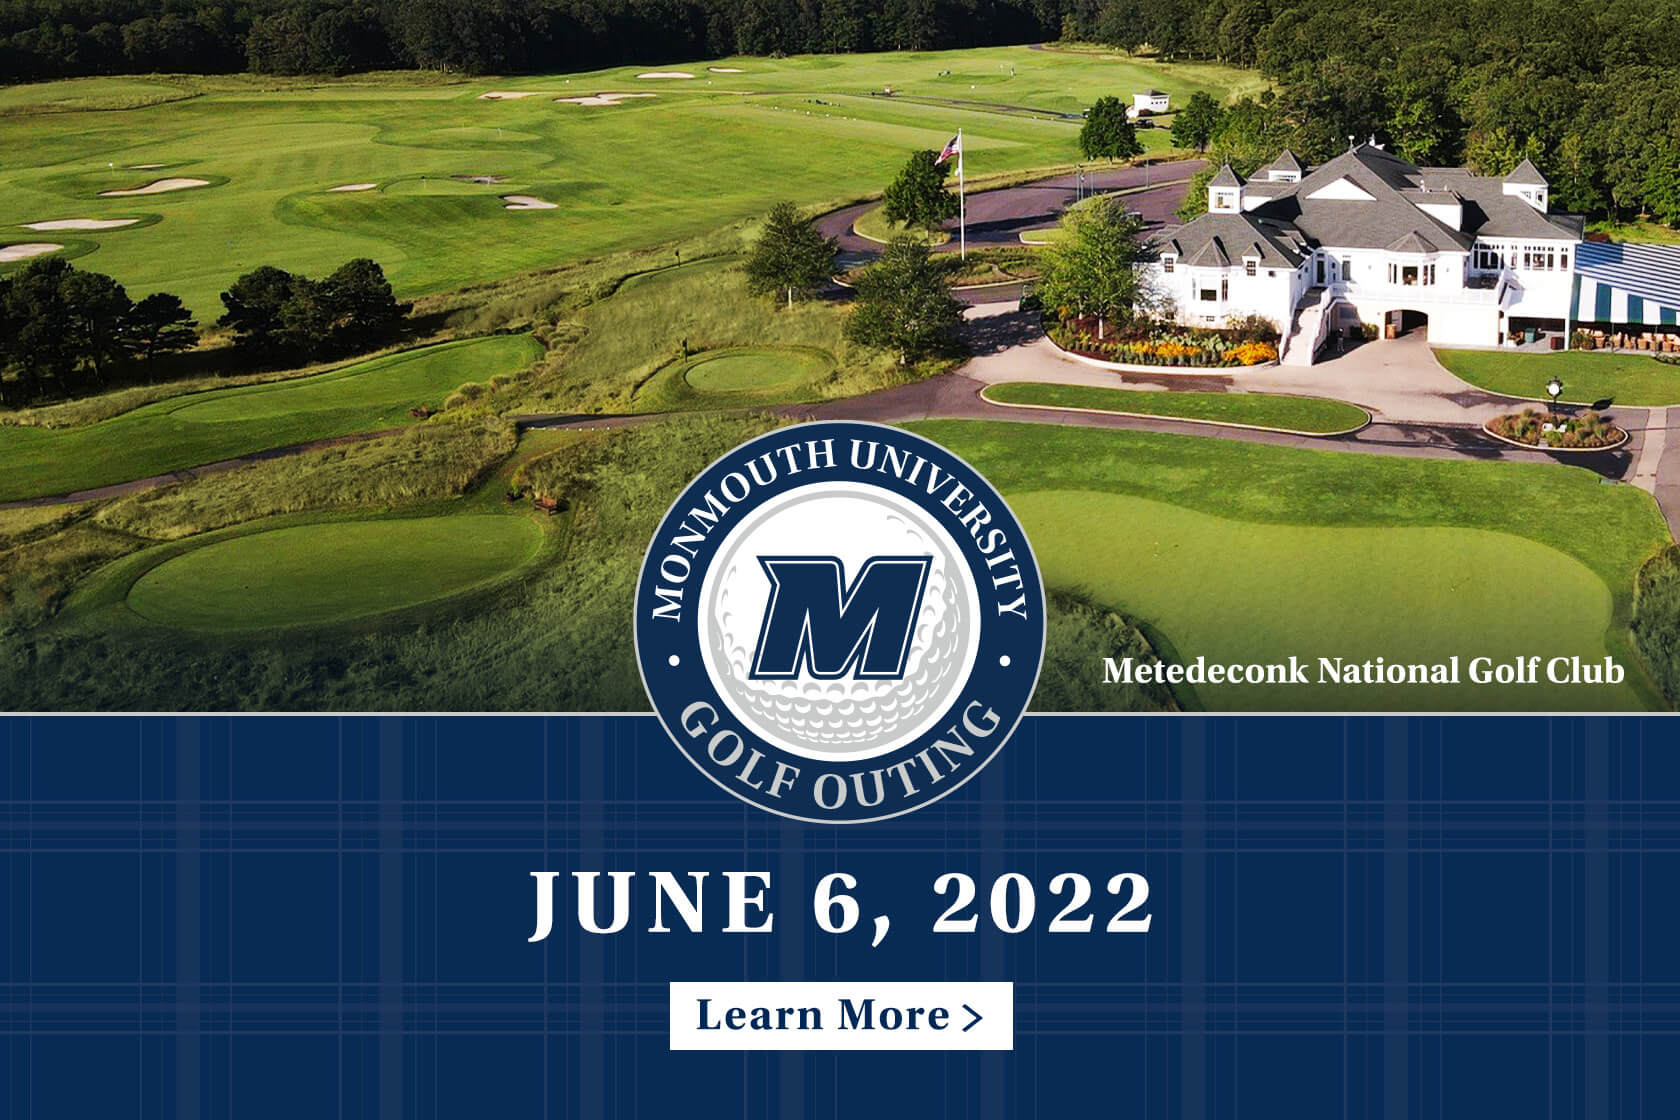 Monmouth University Golf Outing at Metedeconk National Golf Club - June 6, 2022 (Learn More)